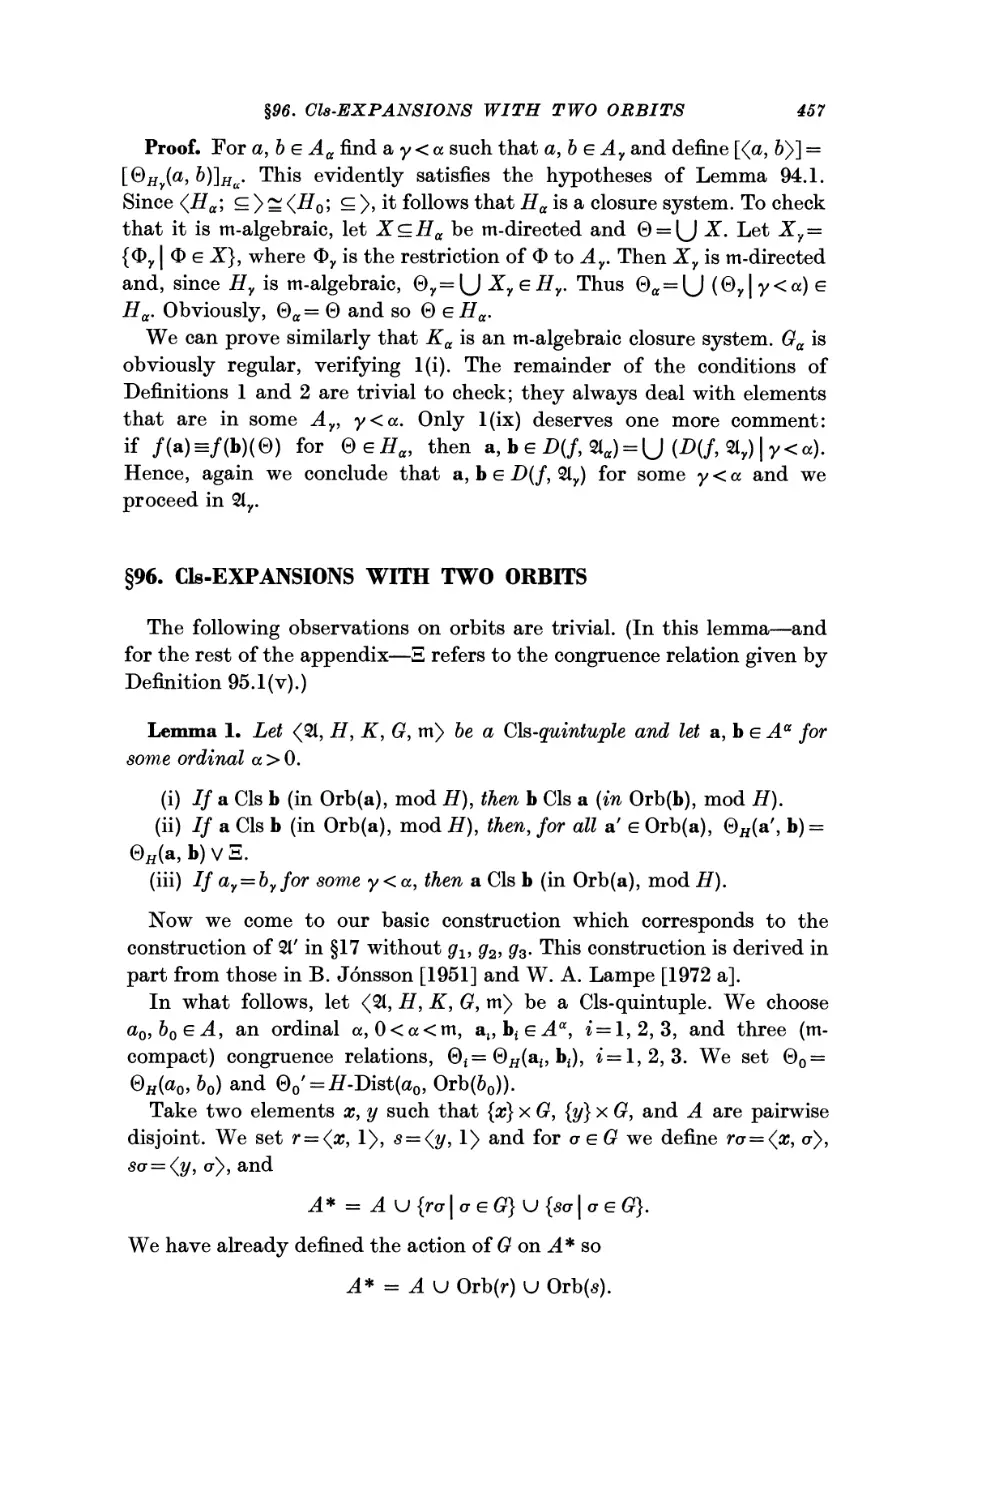 §96. Cls-Expansions with Two Orbits